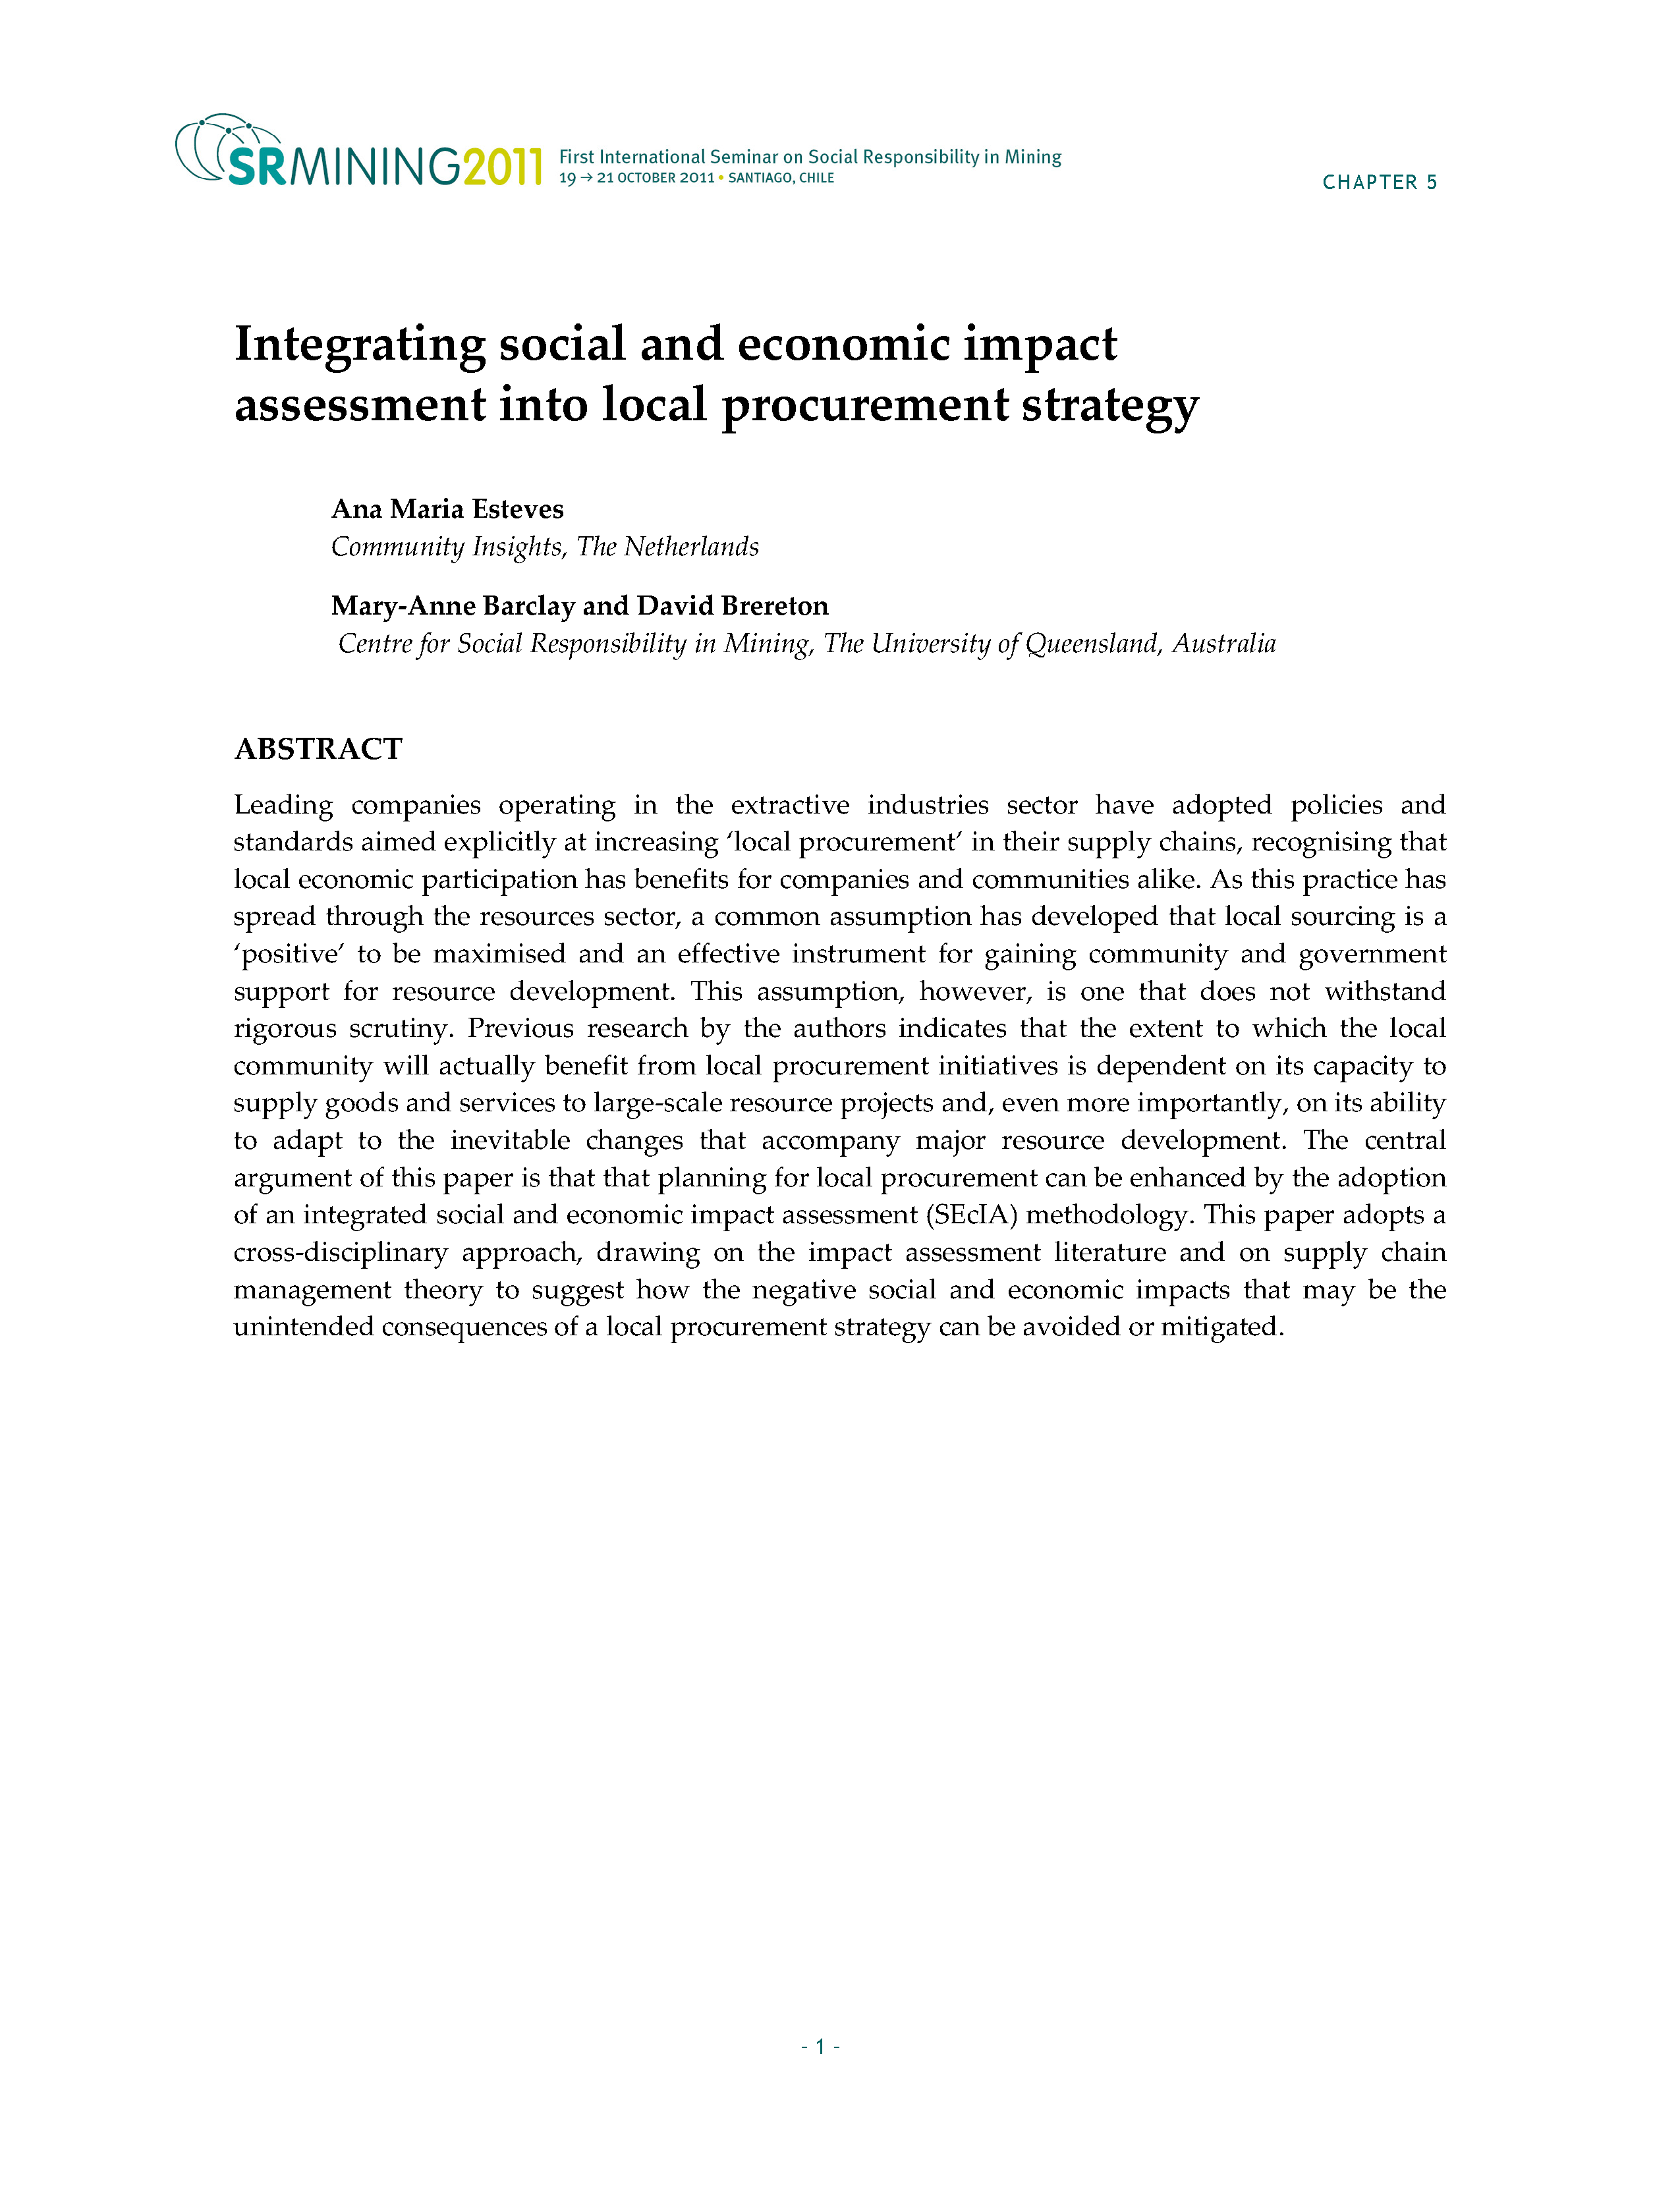 Integrating social and economic impact assessment into local procurement strategy